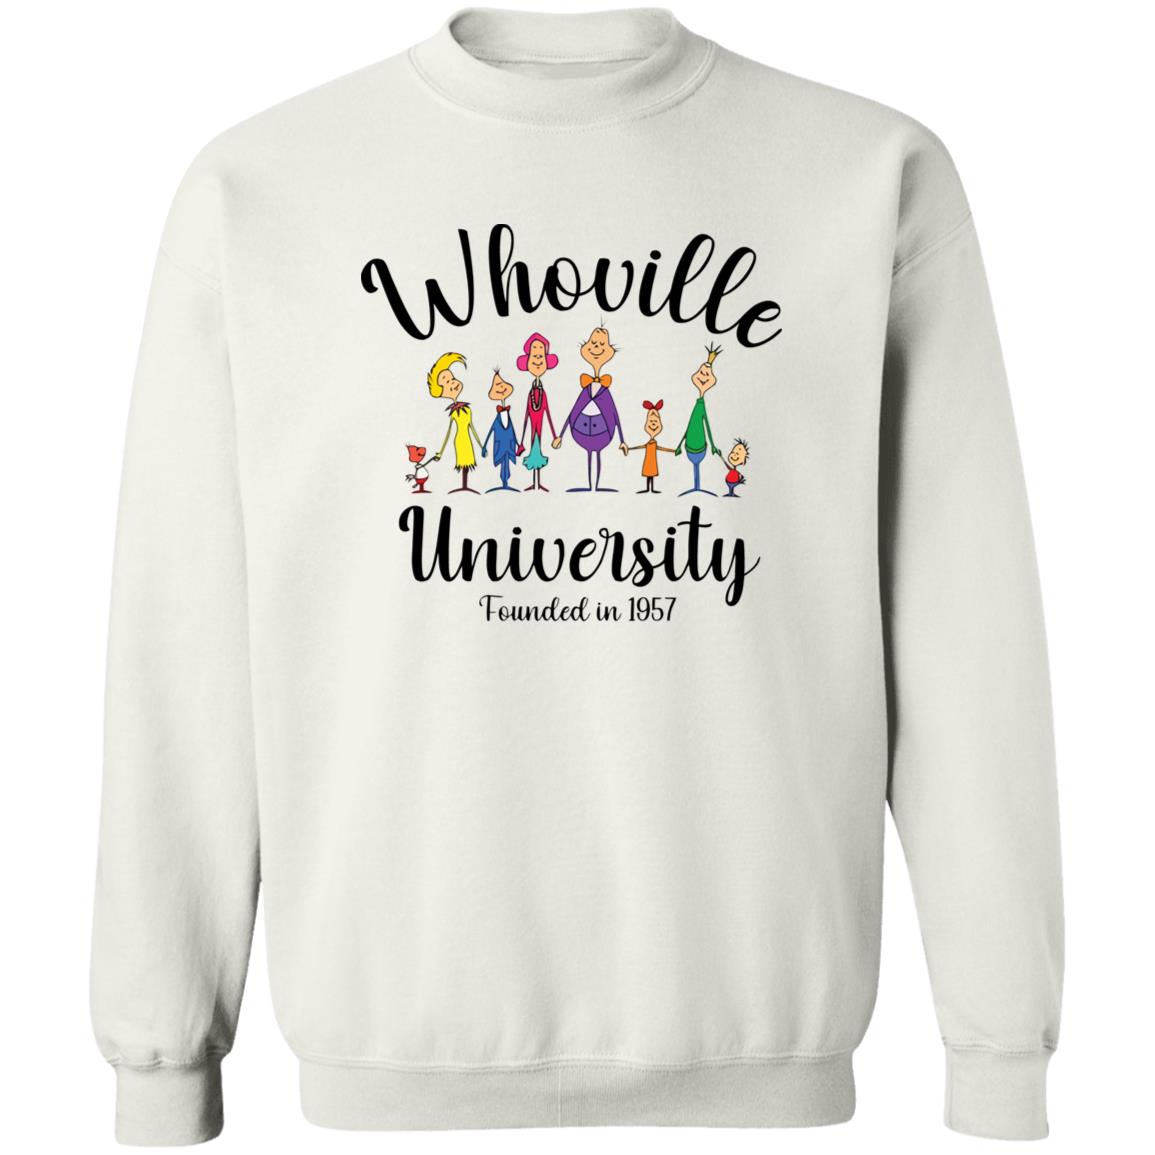 Whoville University Founded In 1957 Shirt 2